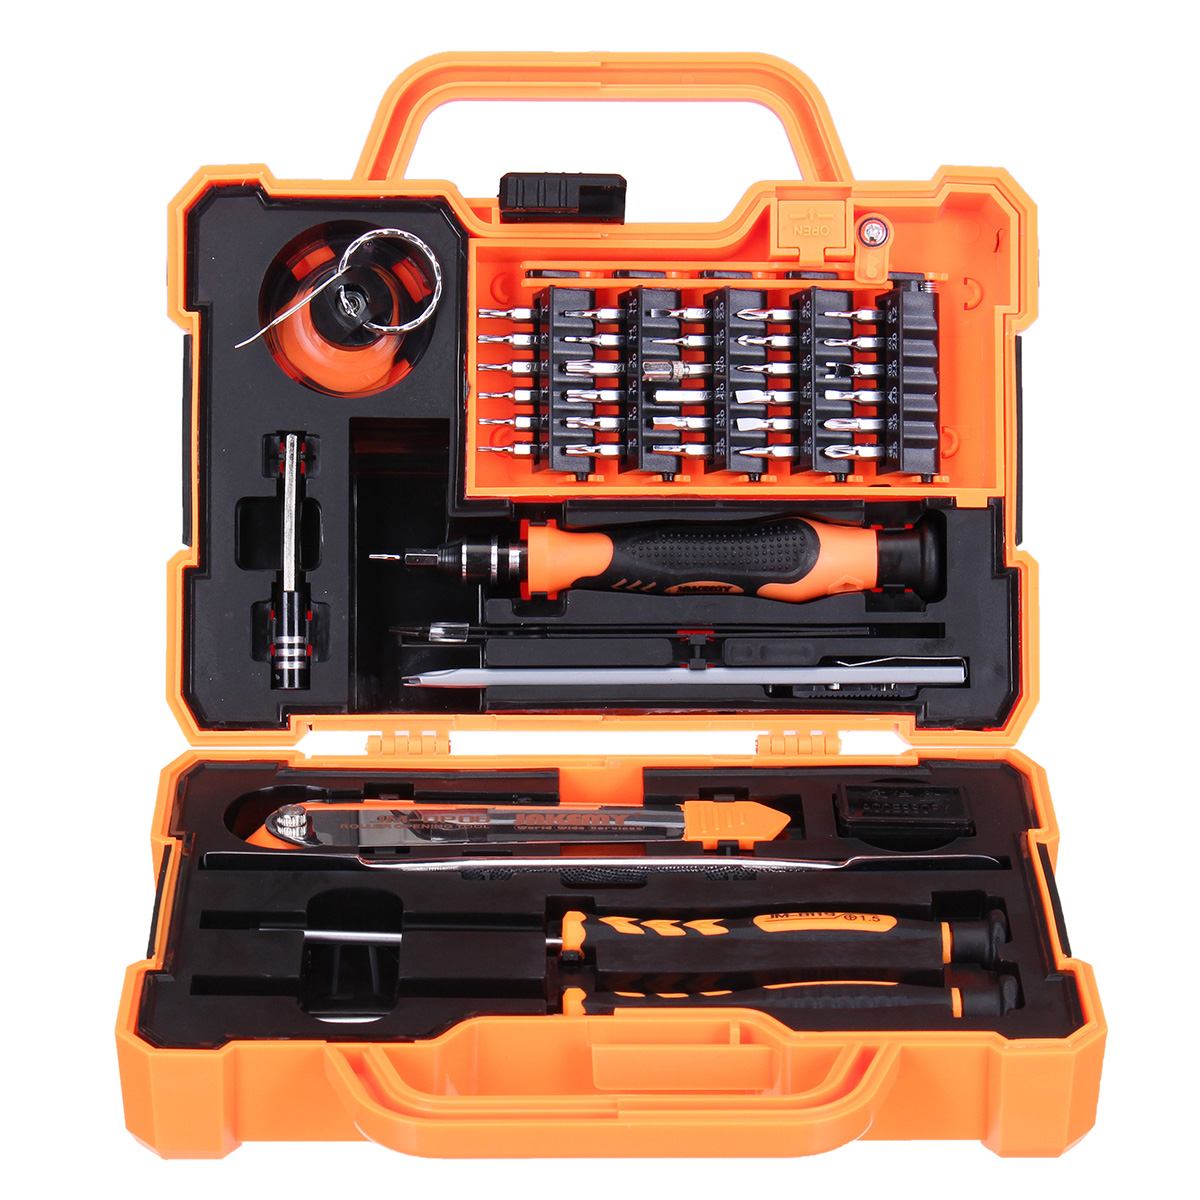 

JAKEMY JM-8139 45 in 1 Professional Electronic Precision Screwdriver Set Household Repair Tool kit